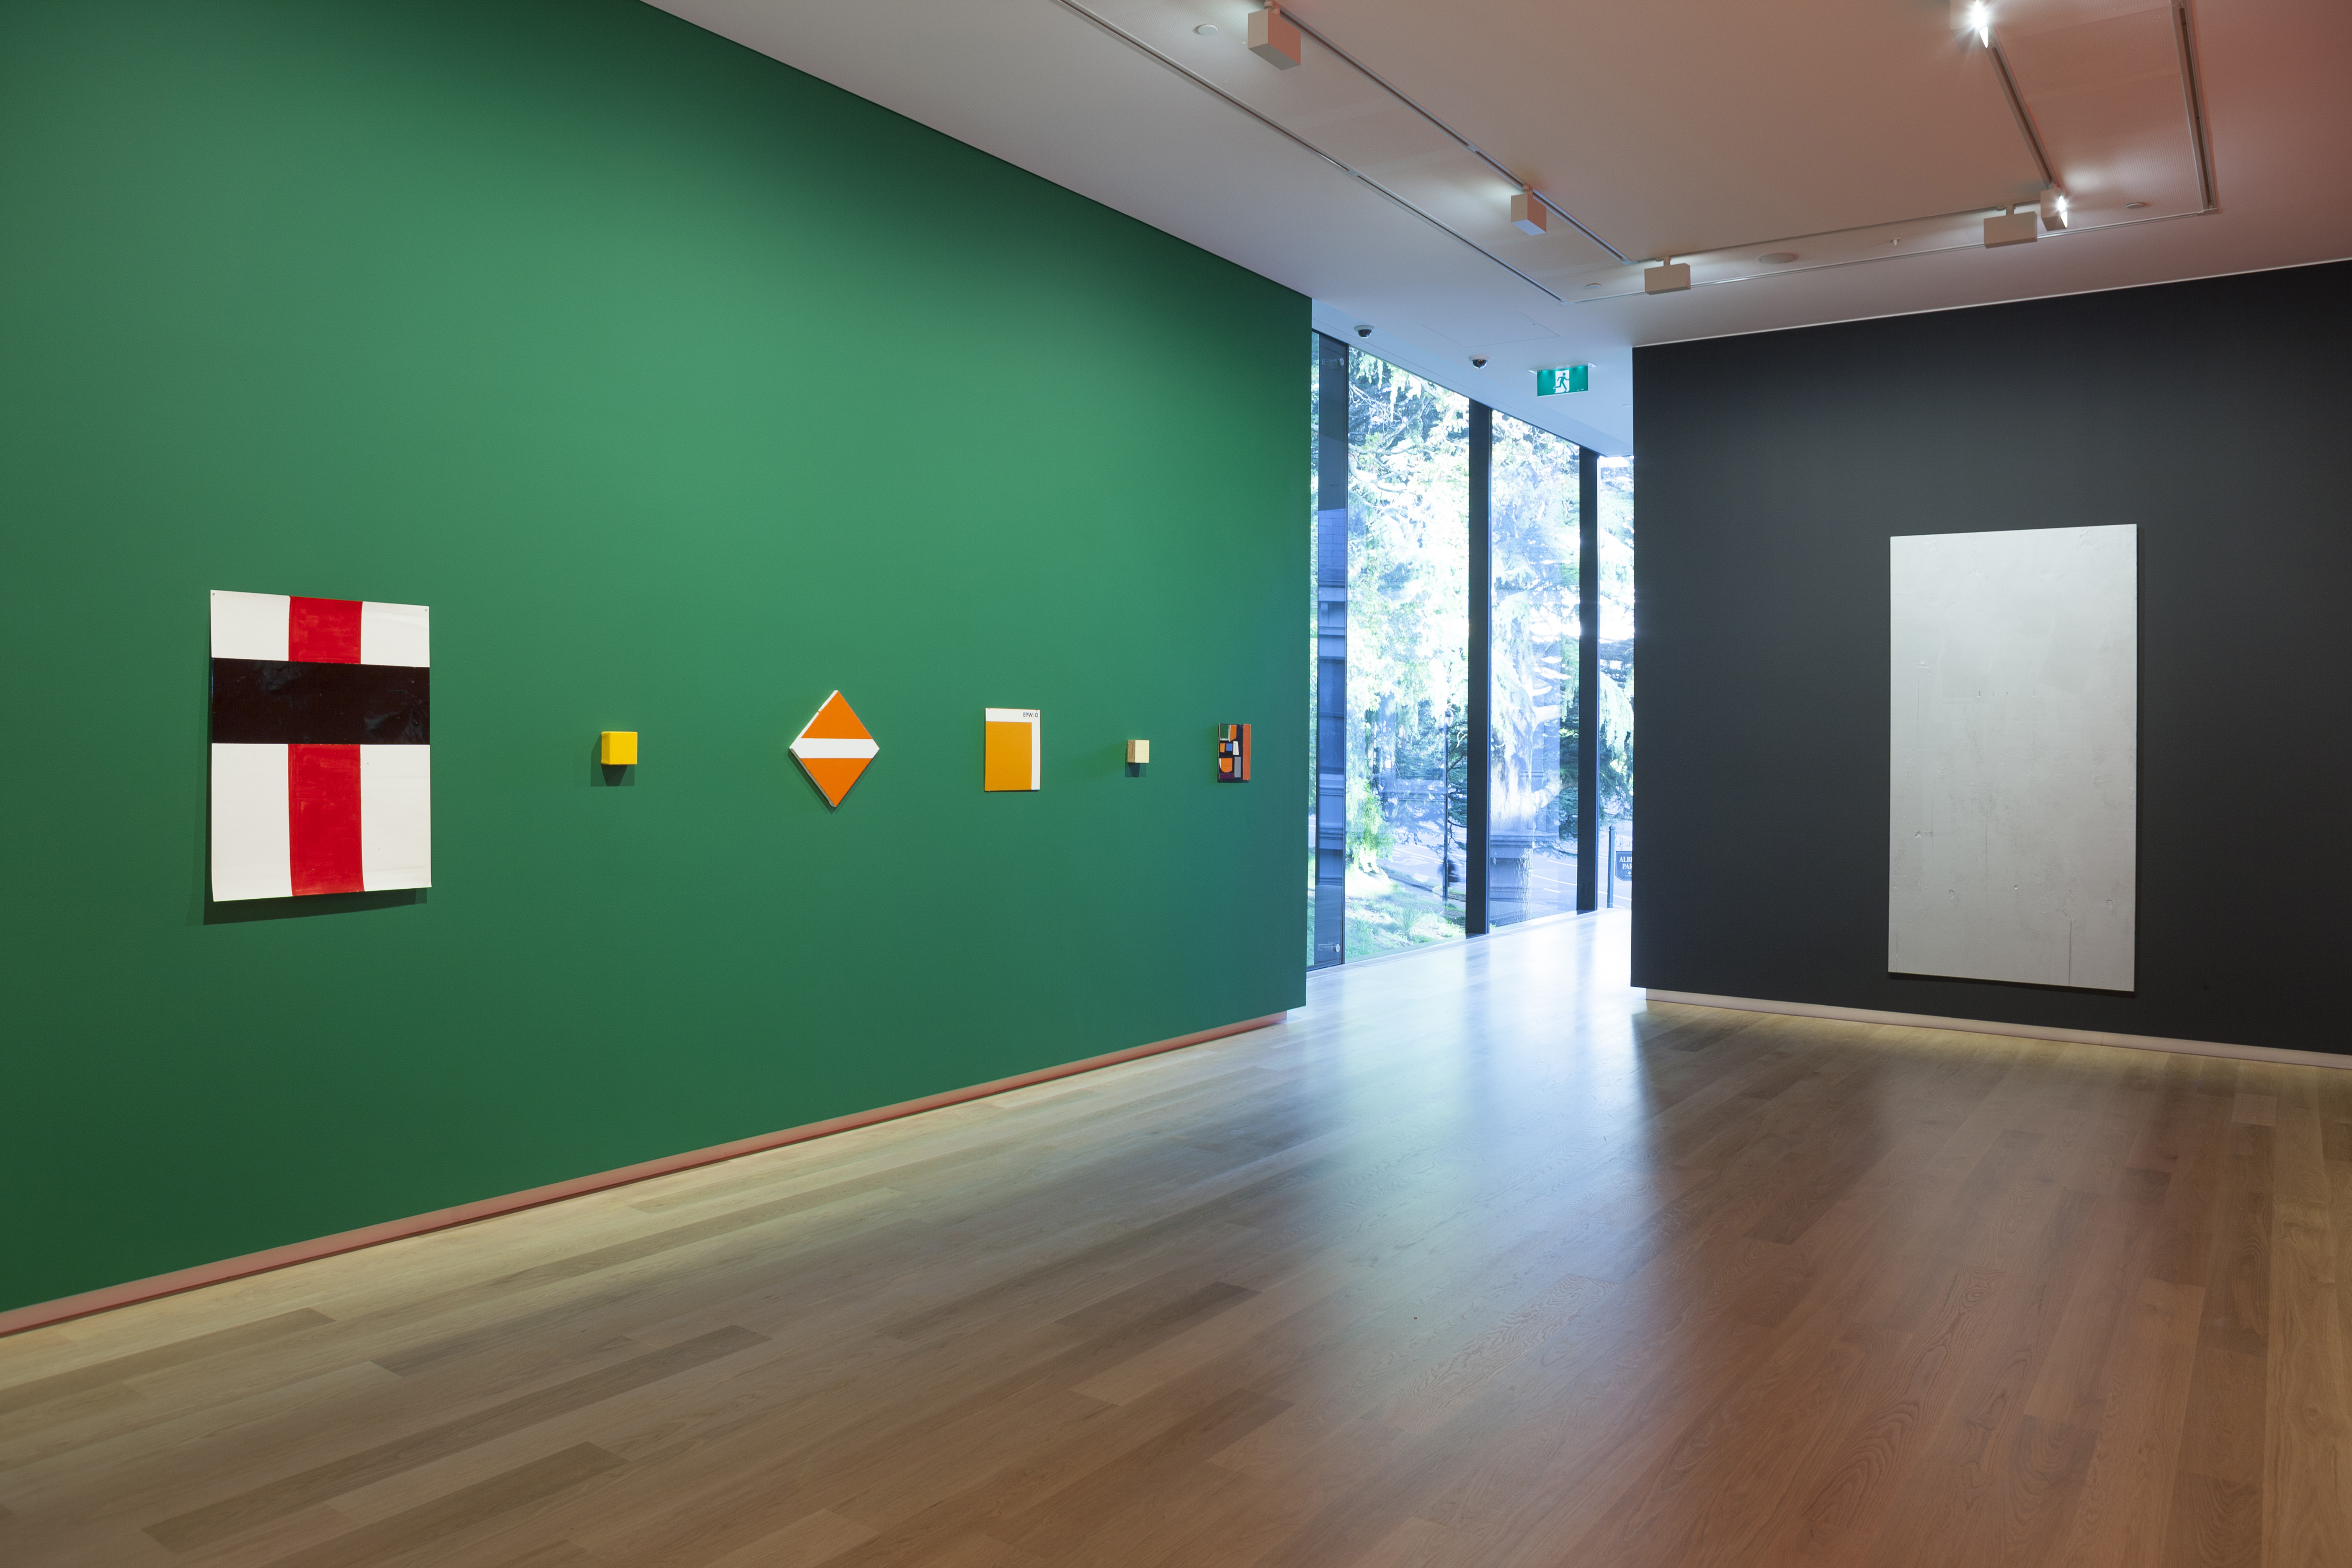 <p><em>John Nixon: Abstraction/Colour is an Abstraction</em>,&nbsp;2017-2018<br />
Installation view<br />
Auckland Art Gallery Toi O Tamaki<br />
Curated by Natasha Conland and Zara Stanhope</p>